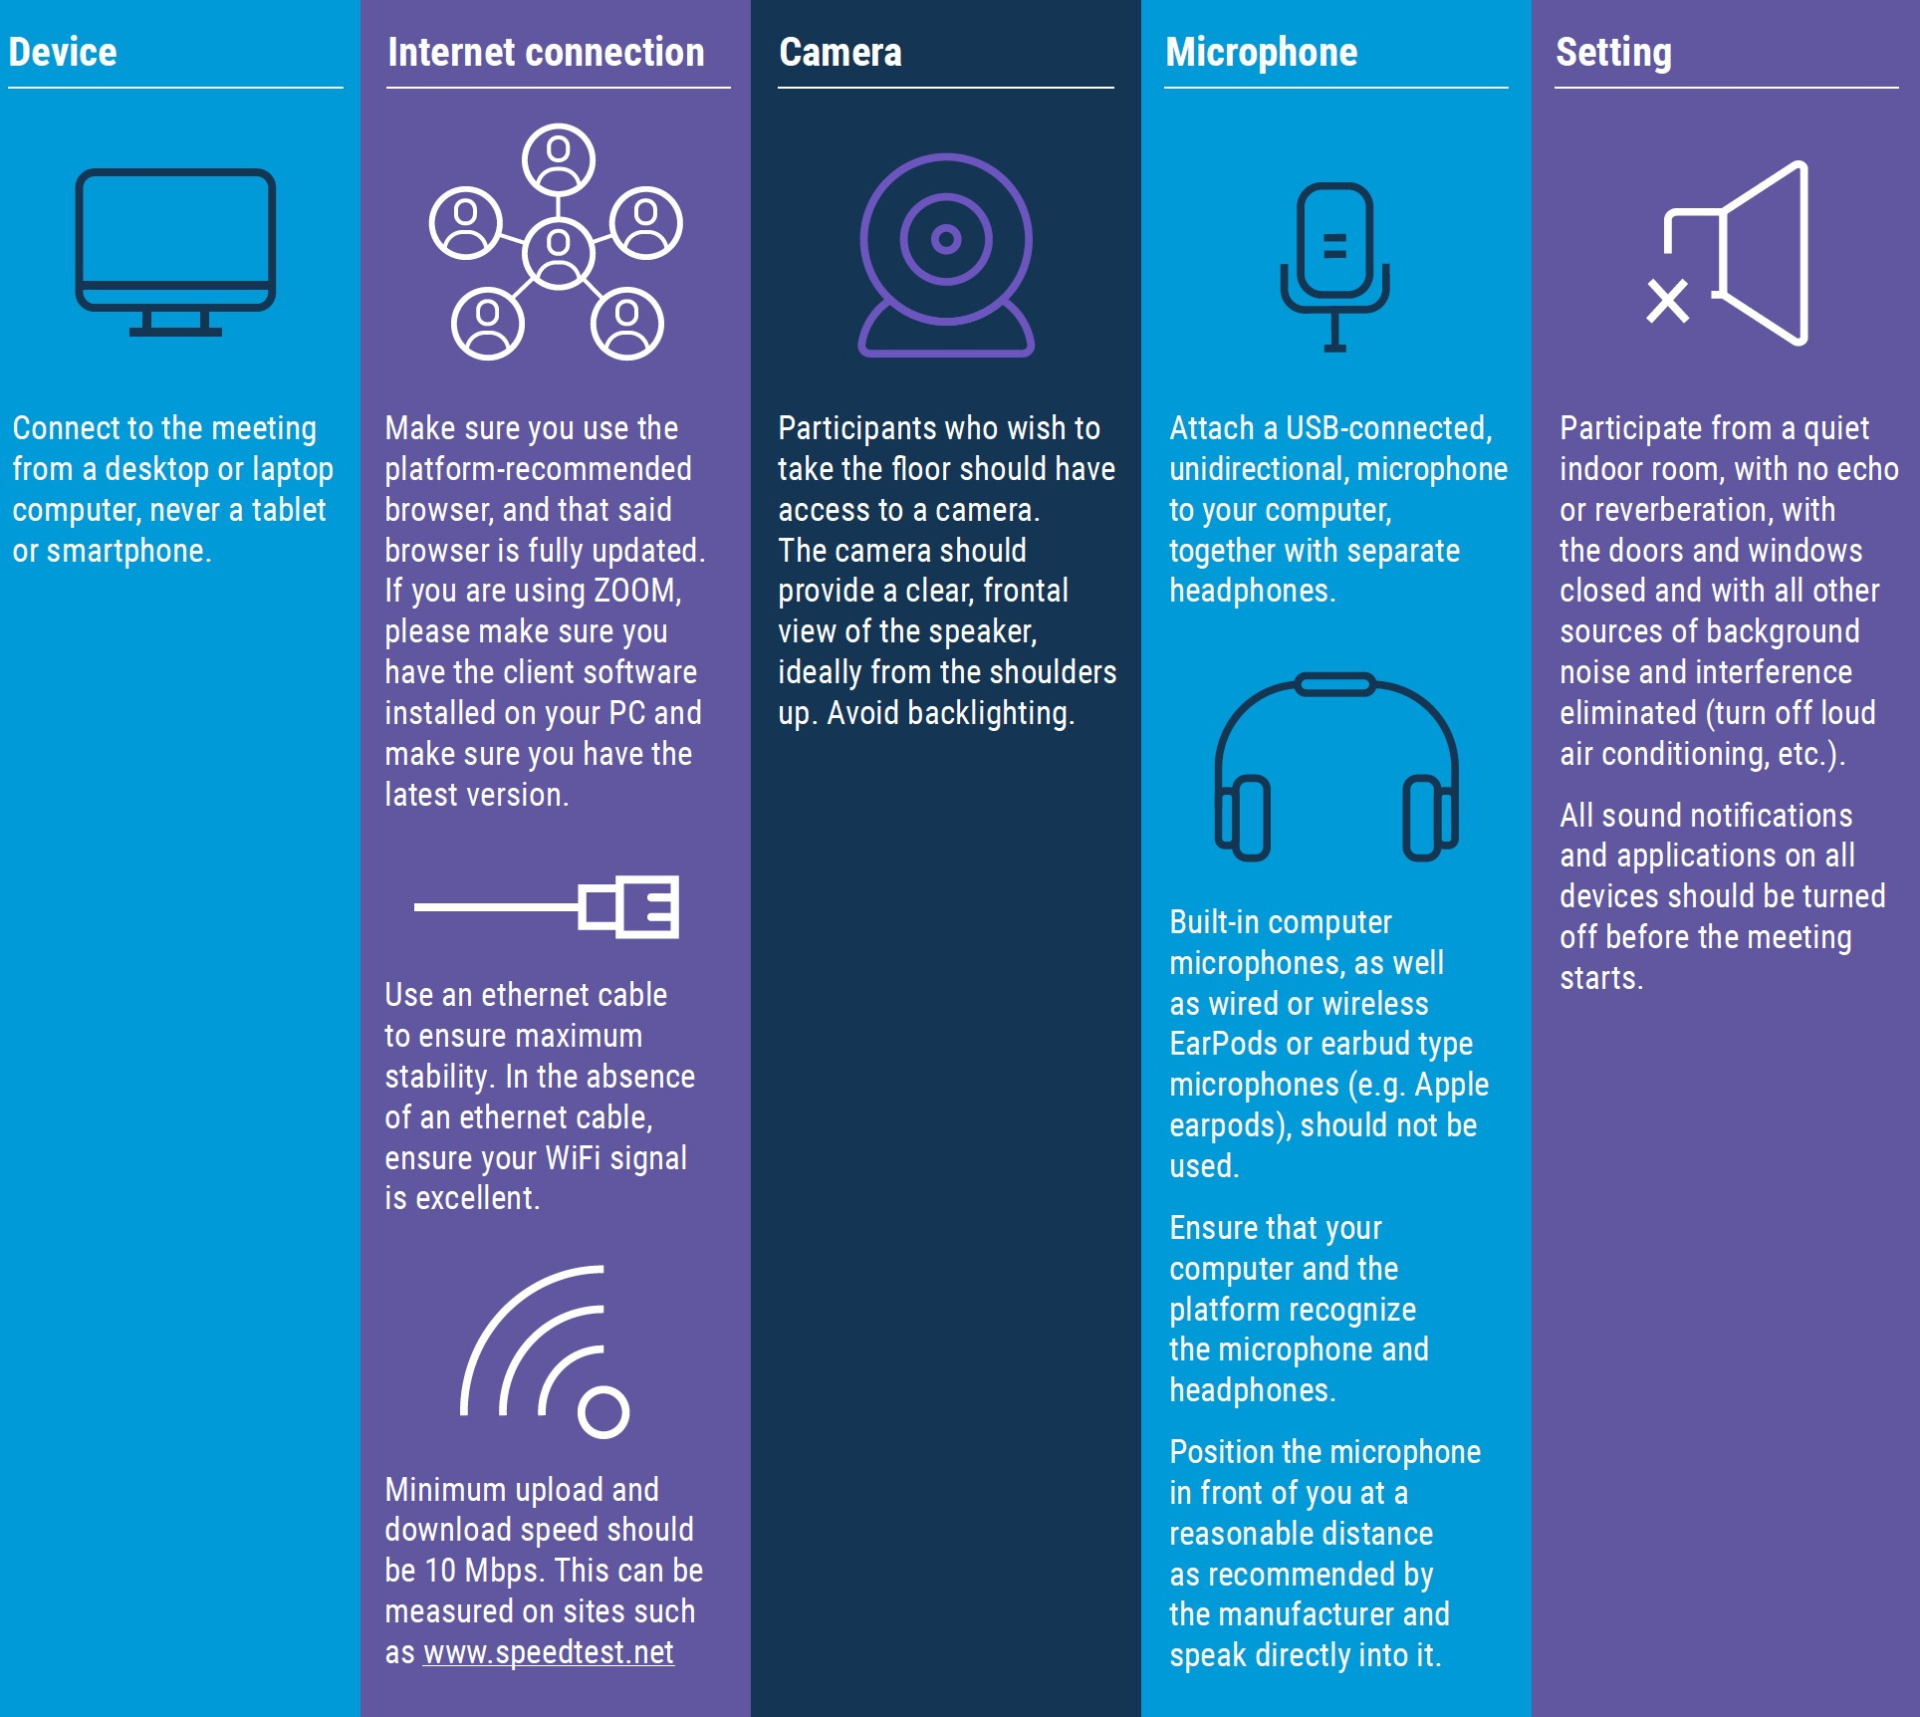 An infographic displaying tips for better remote meetings, including the choice of the device, internet connection, camera, microphone and settings.